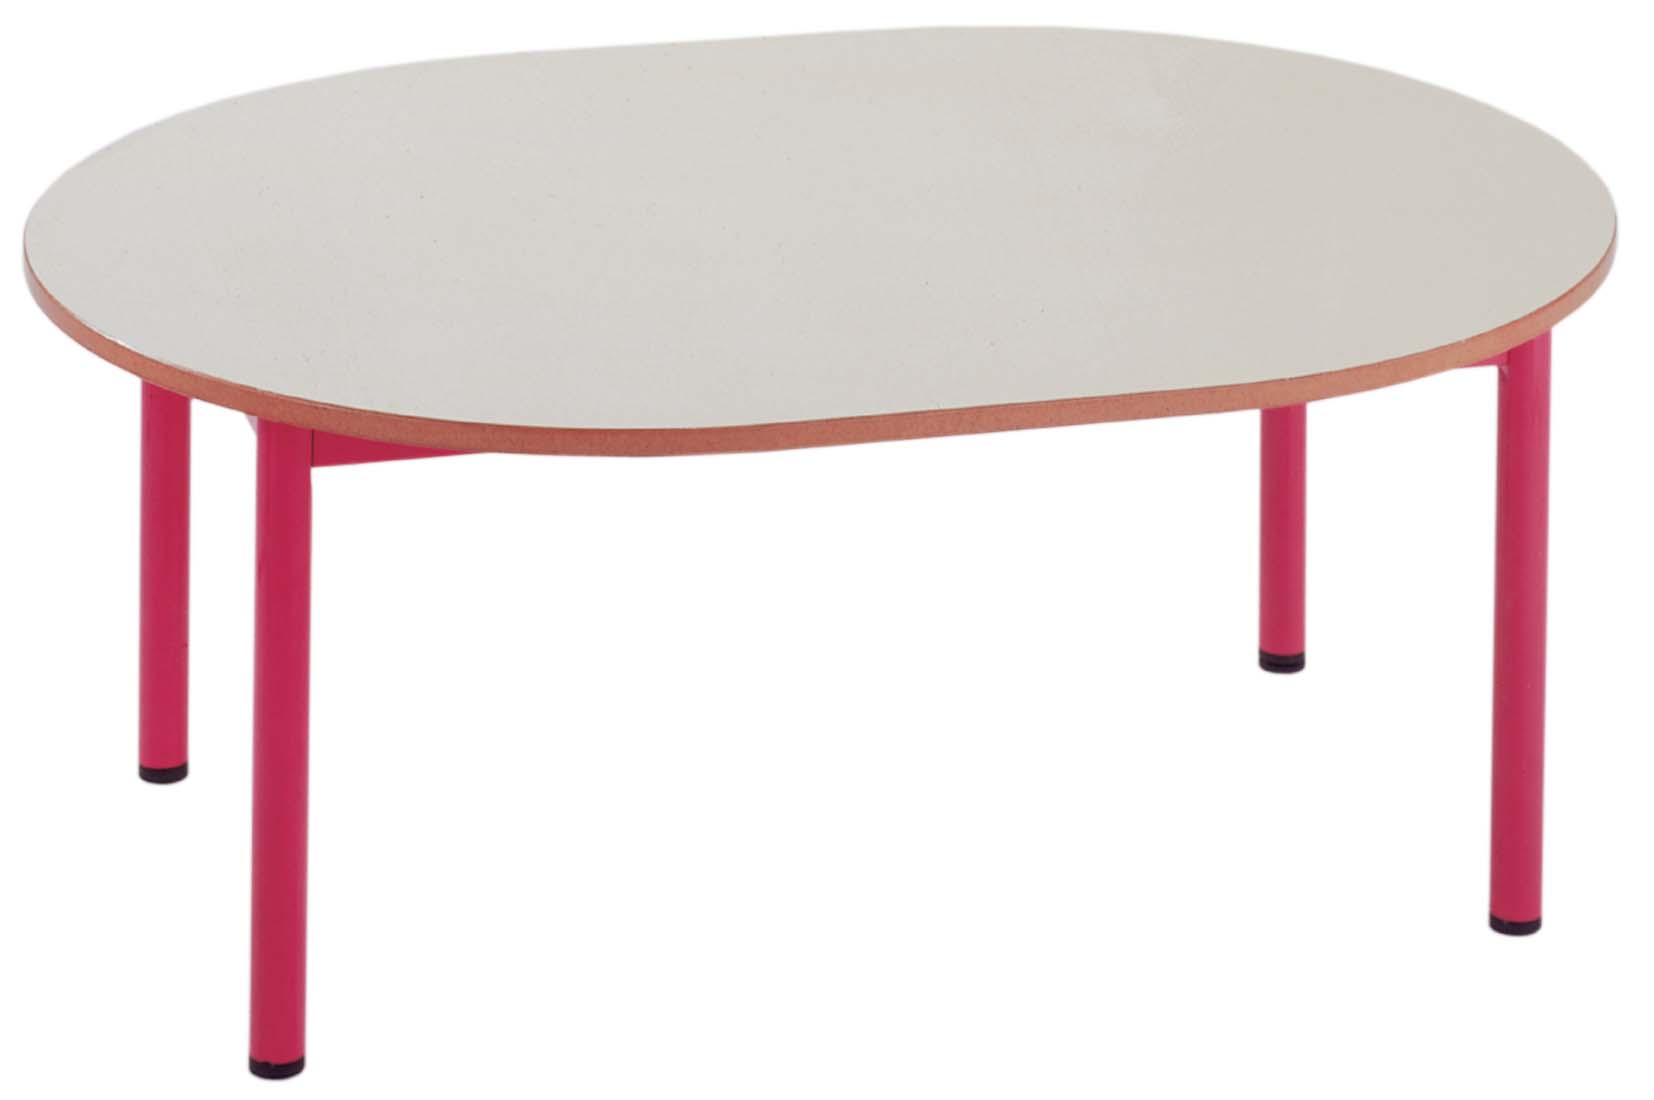 Table maternelle fixe Ovale